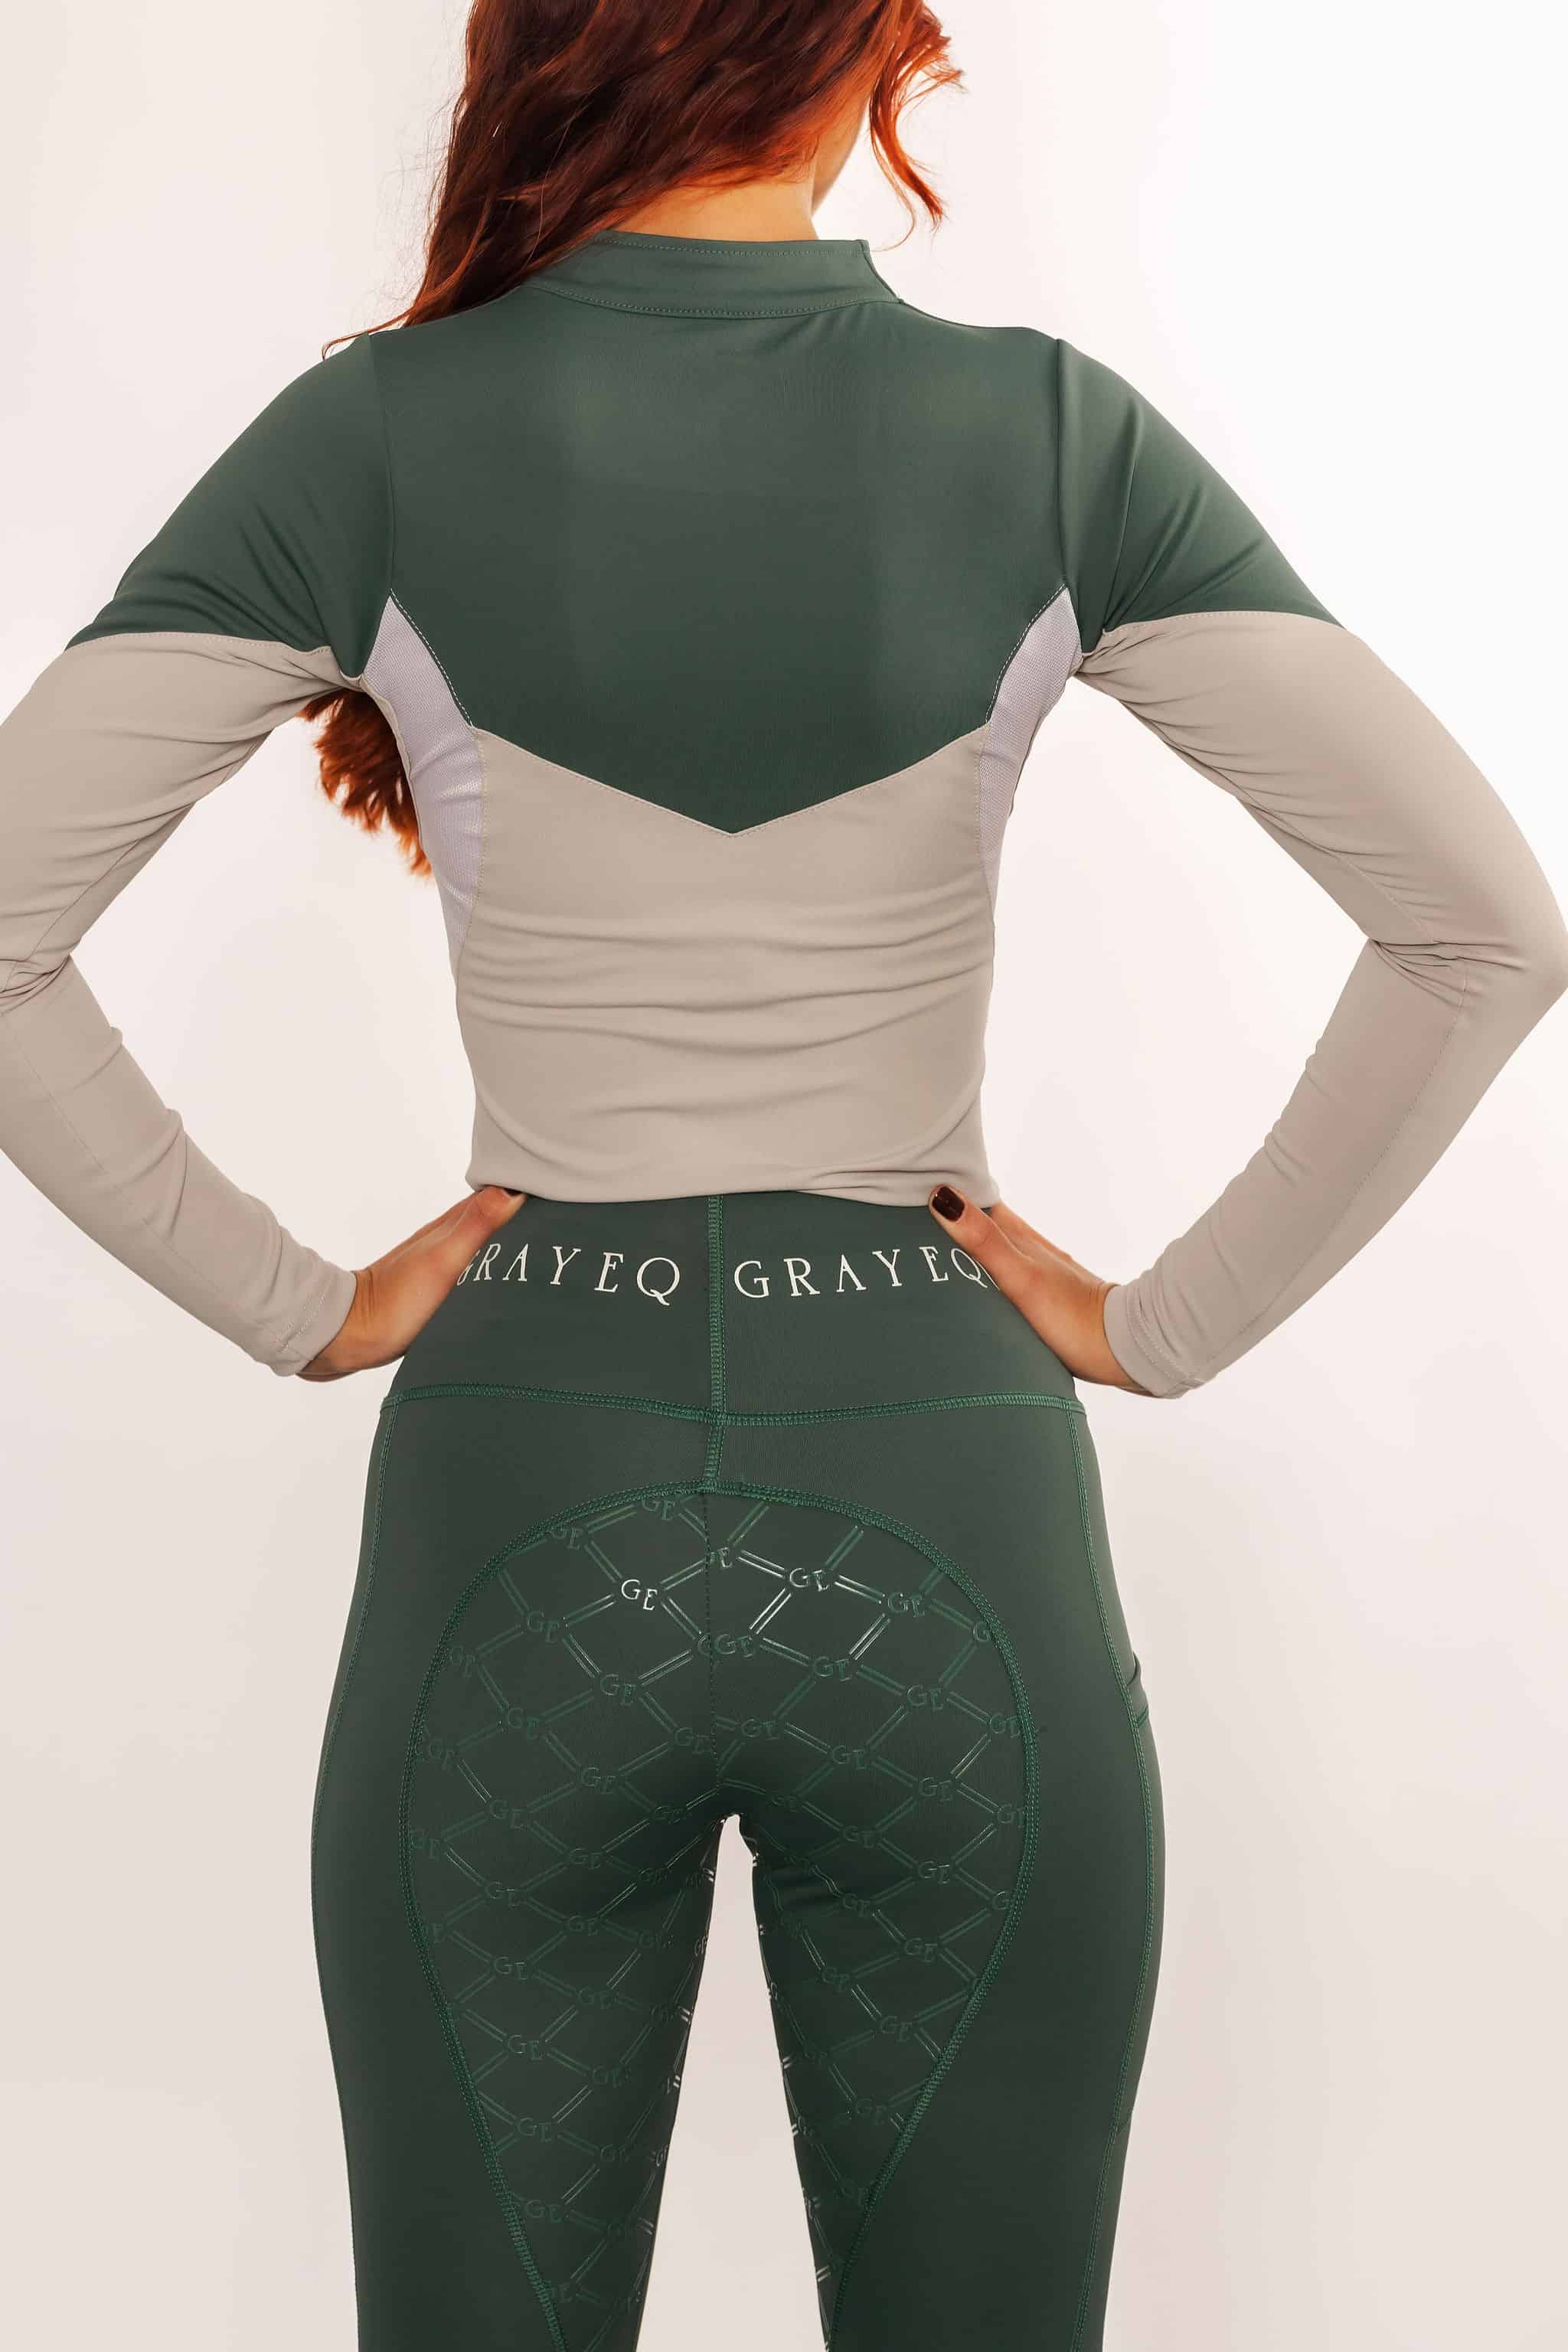 A view of the back of our green riding leggings with full non slip seat.